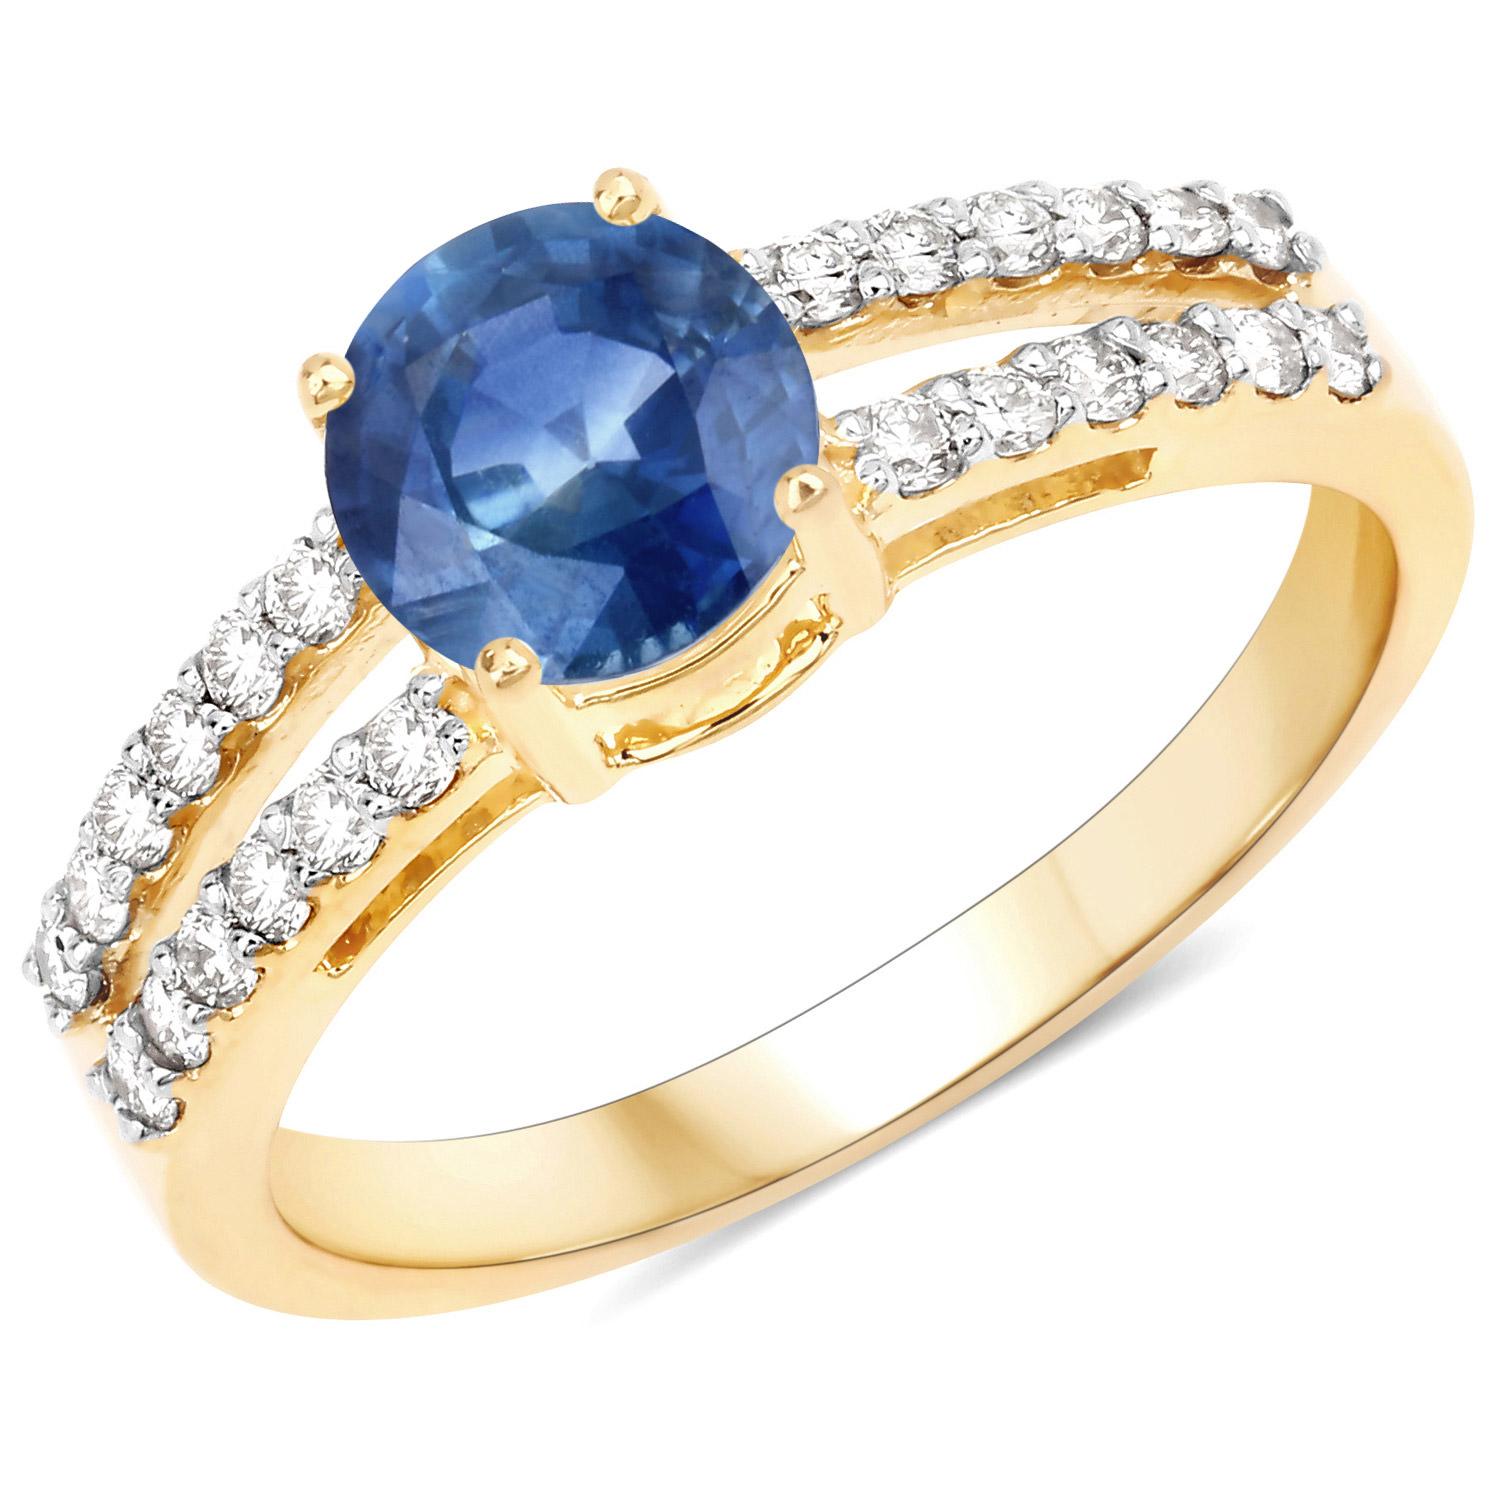 Contemporary Natural 1 Carat Blue Sapphire and Diamond Ring Set In 14K Yellow Gold For Sale